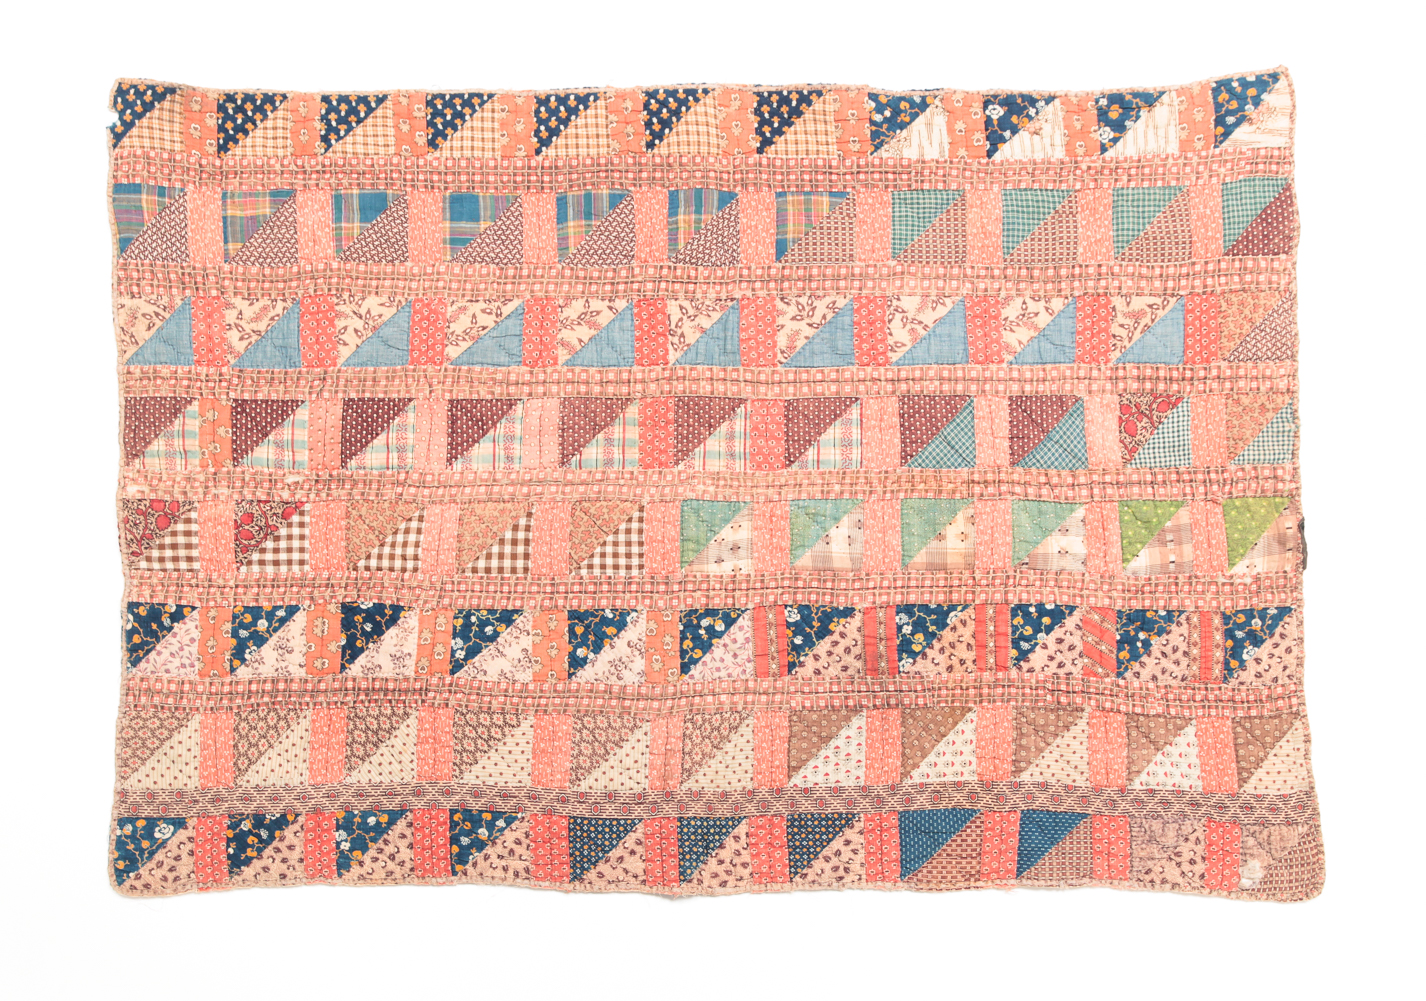 AMERICAN PIECED CRIB QUILT Late 2dfcaa